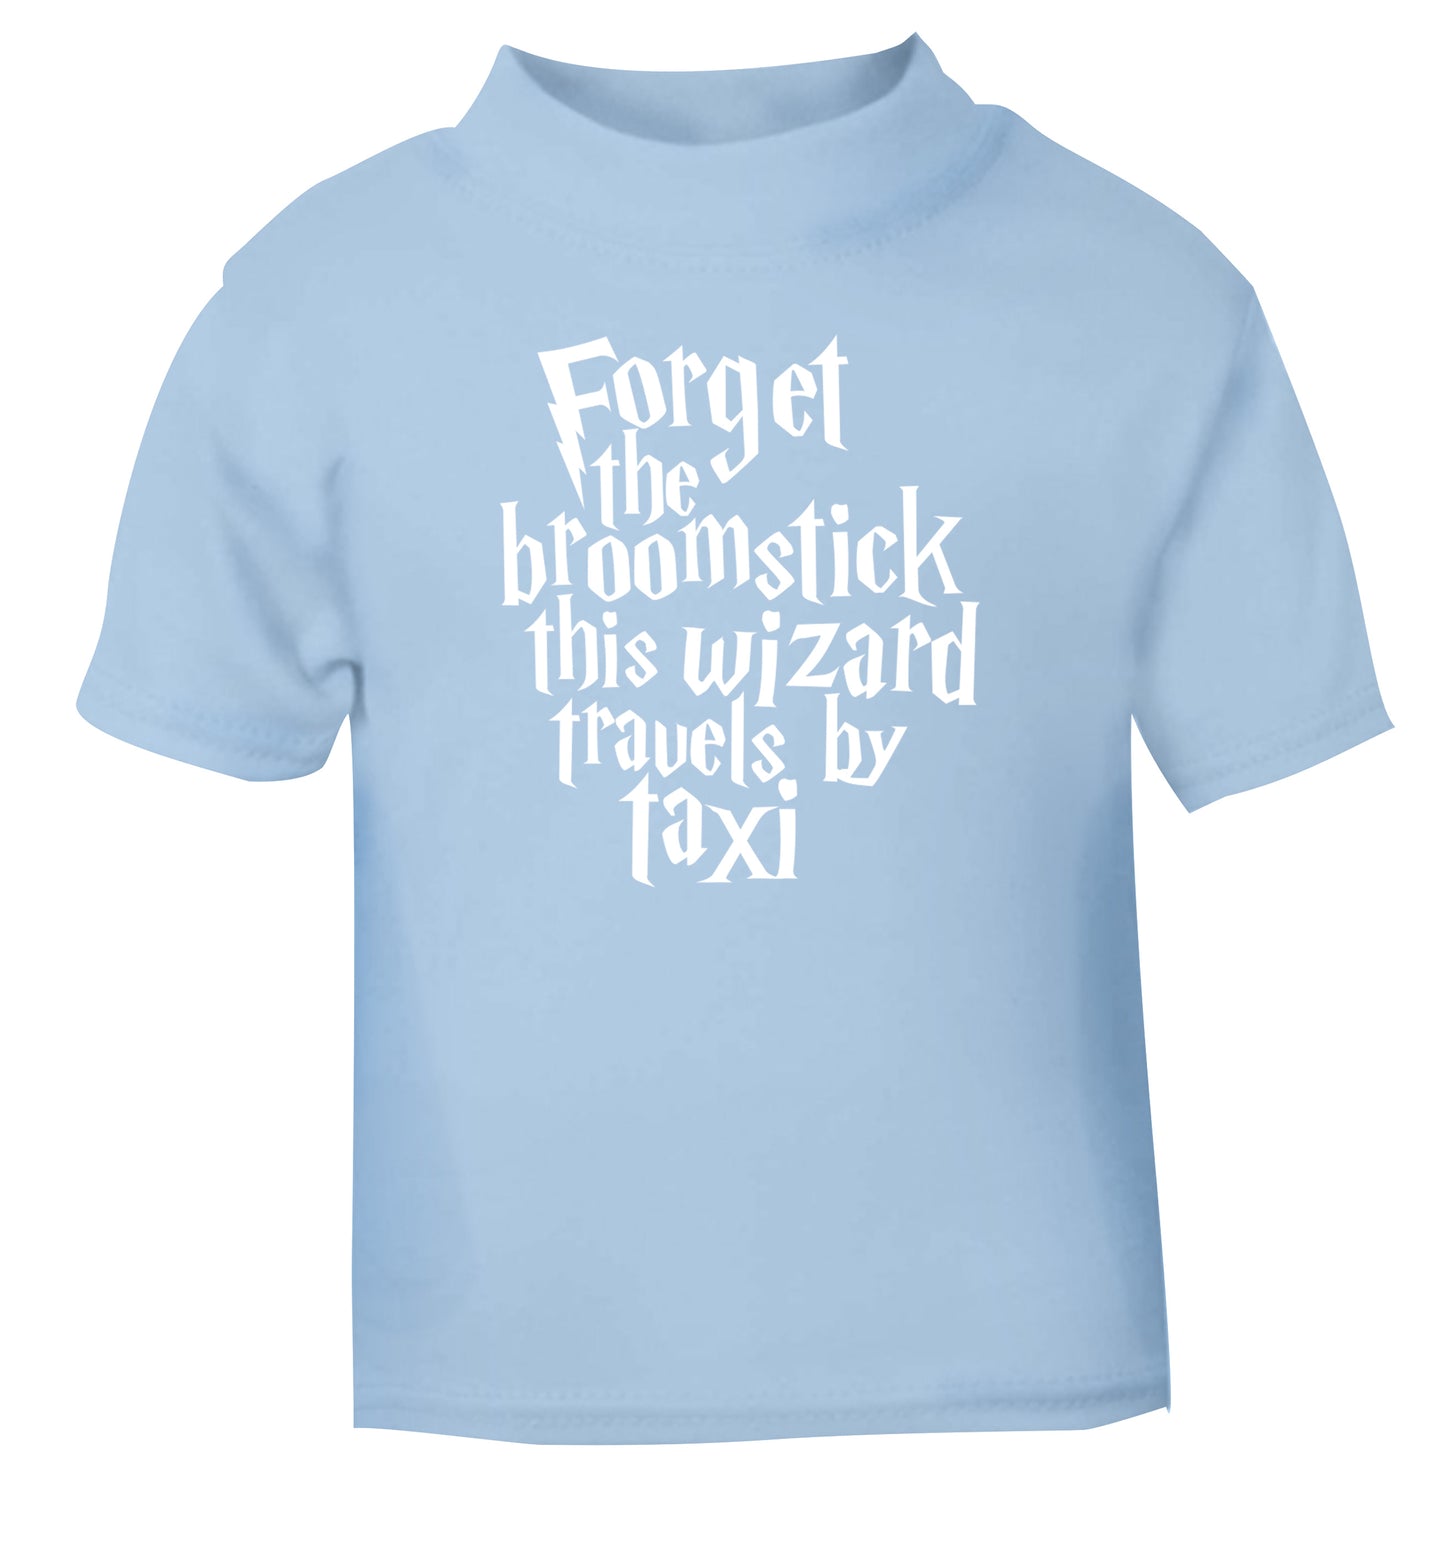 Forget the broomstick this wizard travels by taxi light blue Baby Toddler Tshirt 2 Years